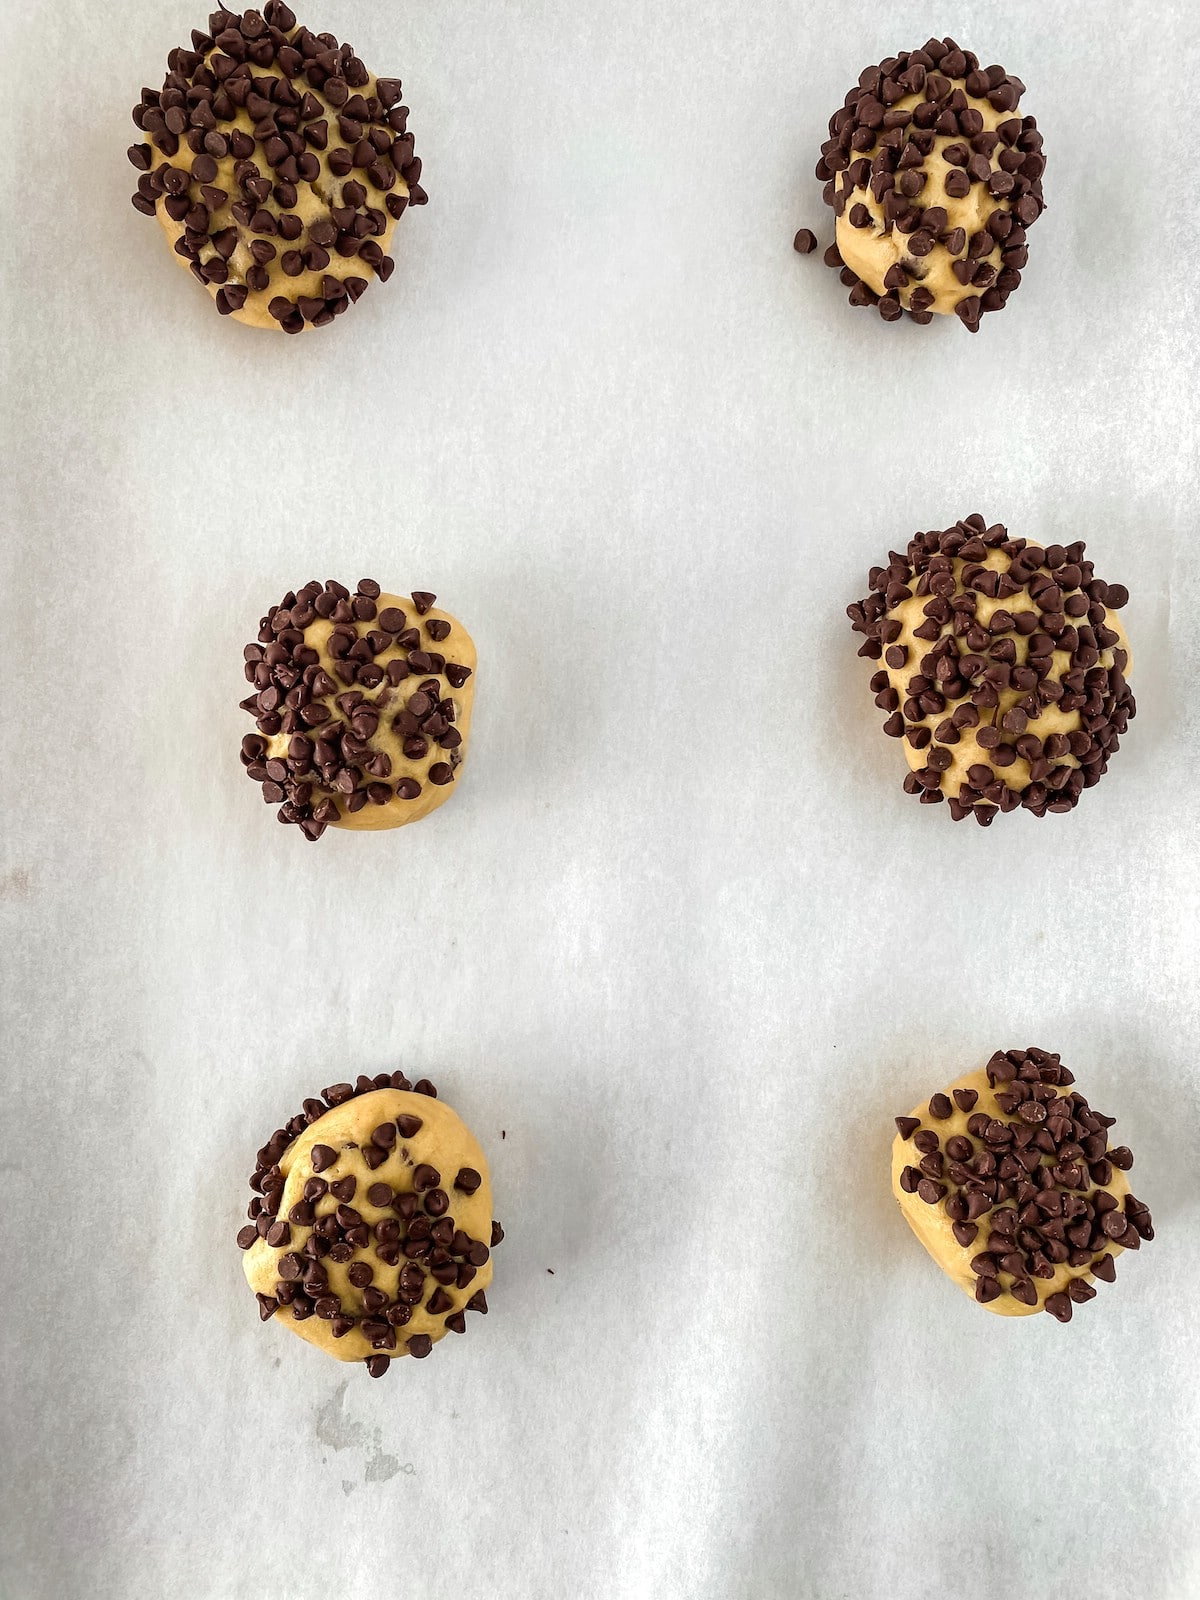 Cookies on baking sheet coated with mini chocolate chips